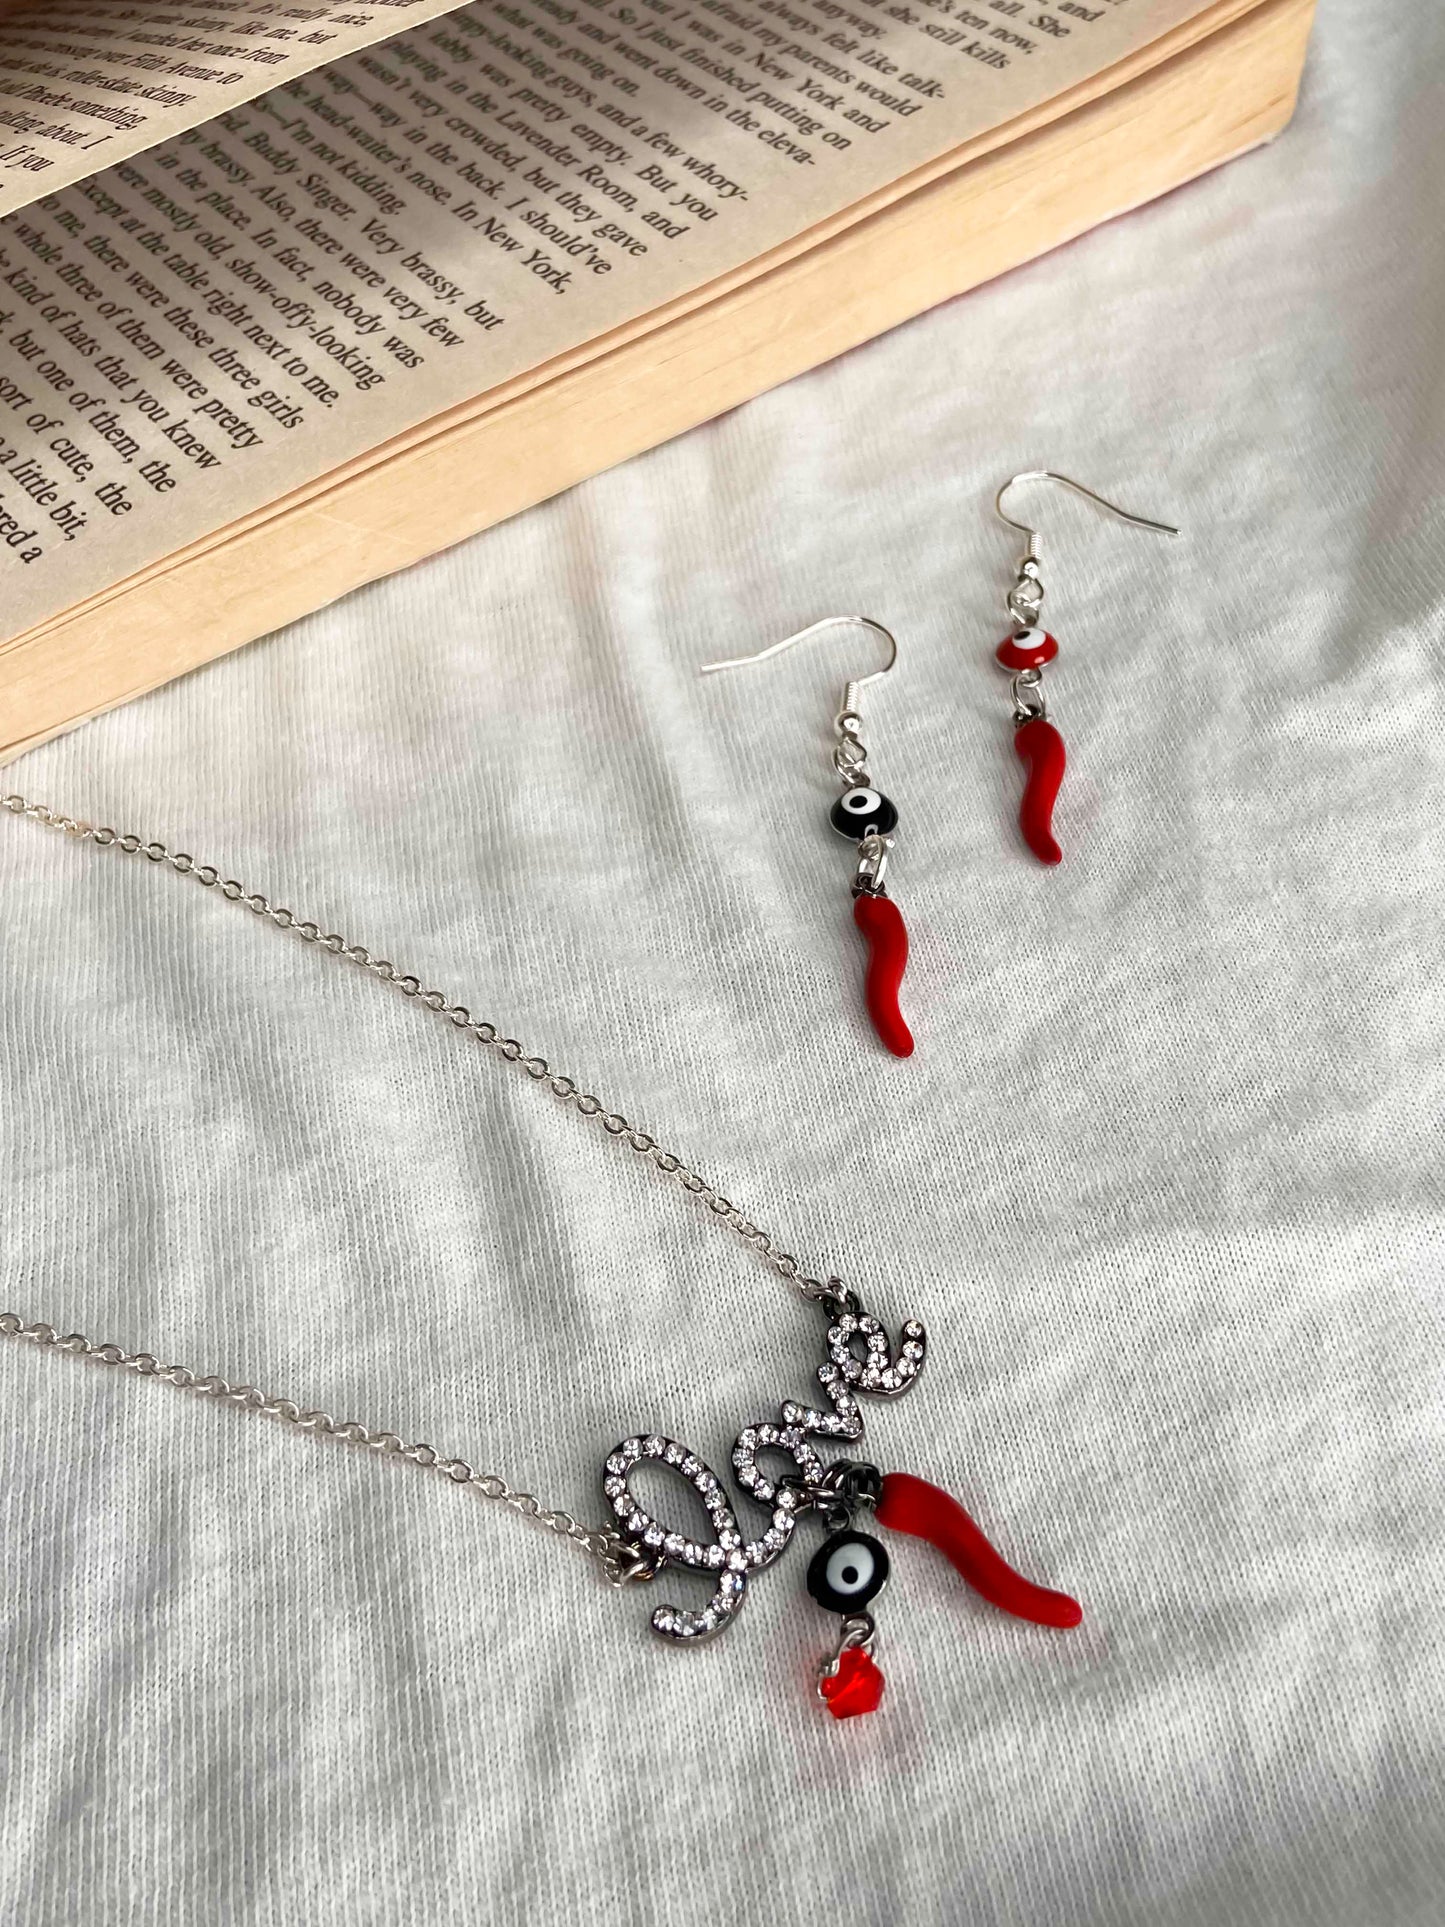 A matching set of a handmade pair of earrings and necklace made using evil eye and chili pepper charms.